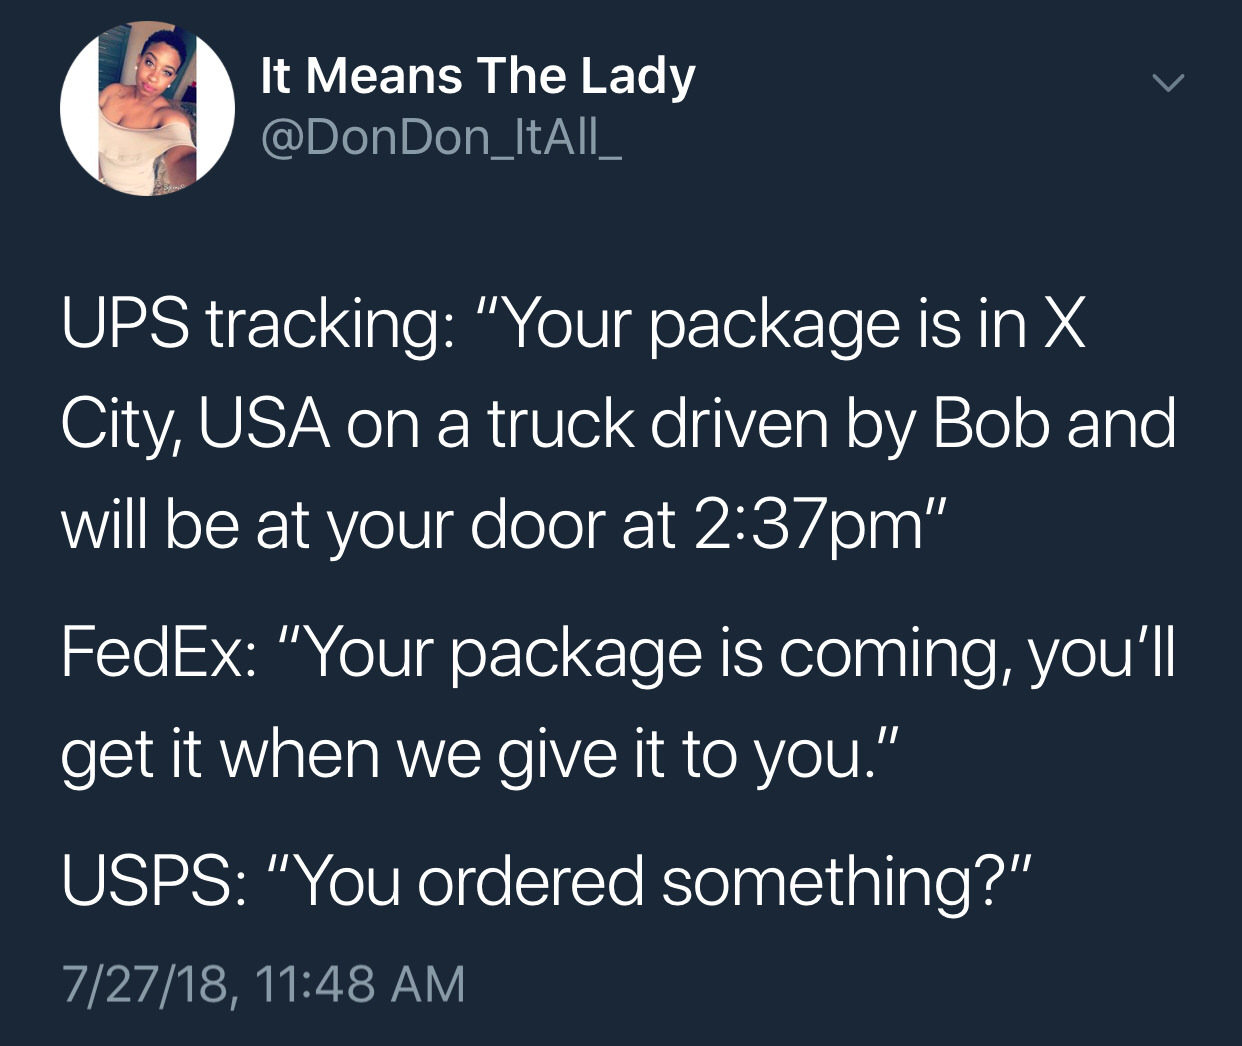 ups fedex usps meme - It Means The Lady Ups tracking "Your package is in X City, Usa on a truck driven by Bob and will be at your door at pm" FedEx "Your package is coming, you'll get it when we give it to you." Usps You ordered something?" 72718,